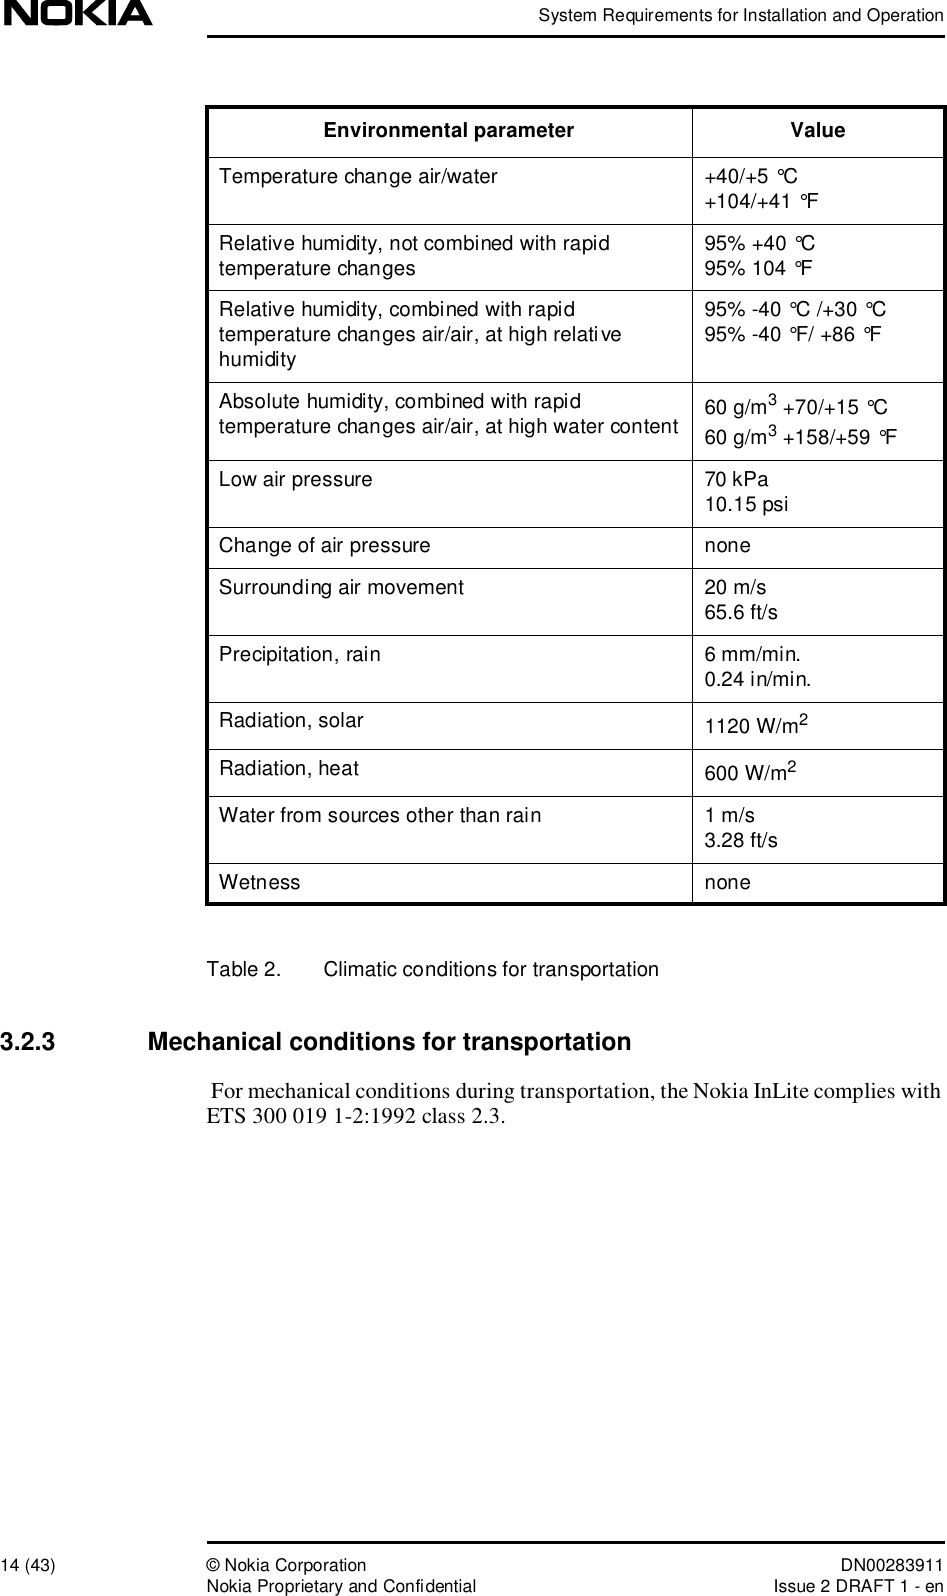 System Requirements for Installation and Operation14 (43)© Nokia Corporation DN00283911Nokia Proprietary and ConfidentialIssue 2 DRAFT 1 - enTable 2.  Climatic conditions for transportation3.2.3  Mechanical conditions for transportation For mechanical conditions during transportation, the Nokia InLite complies with ETS 300 019 1-2:1992 class 2.3.Temperature change air/water+40/+5 °C +104/+41 °FRelative humidity, not combined with rapid temperature changes 95% +40 °C 95% 104 °FRelative humidity, combined with rapid temperature changes air/air, at high relative humidity95% -40 °C /+30 °C 95% -40 °F/ +86 °FAbsolute humidity, combined with rapid temperature changes air/air, at high water content60 g/m3 +70/+15 °C 60 g/m3 +158/+59 °FLow air pressure70 kPa10.15 psiChange of air pressurenoneSurrounding air movement20 m/s65.6 ft/sPrecipitation, rain 6 mm/min.0.24 in/min.Radiation, solar1120 W/m2Radiation, heat600 W/m2Water from sources other than rain 1 m/s3.28 ft/sWetness noneEnvironmental parameter Value